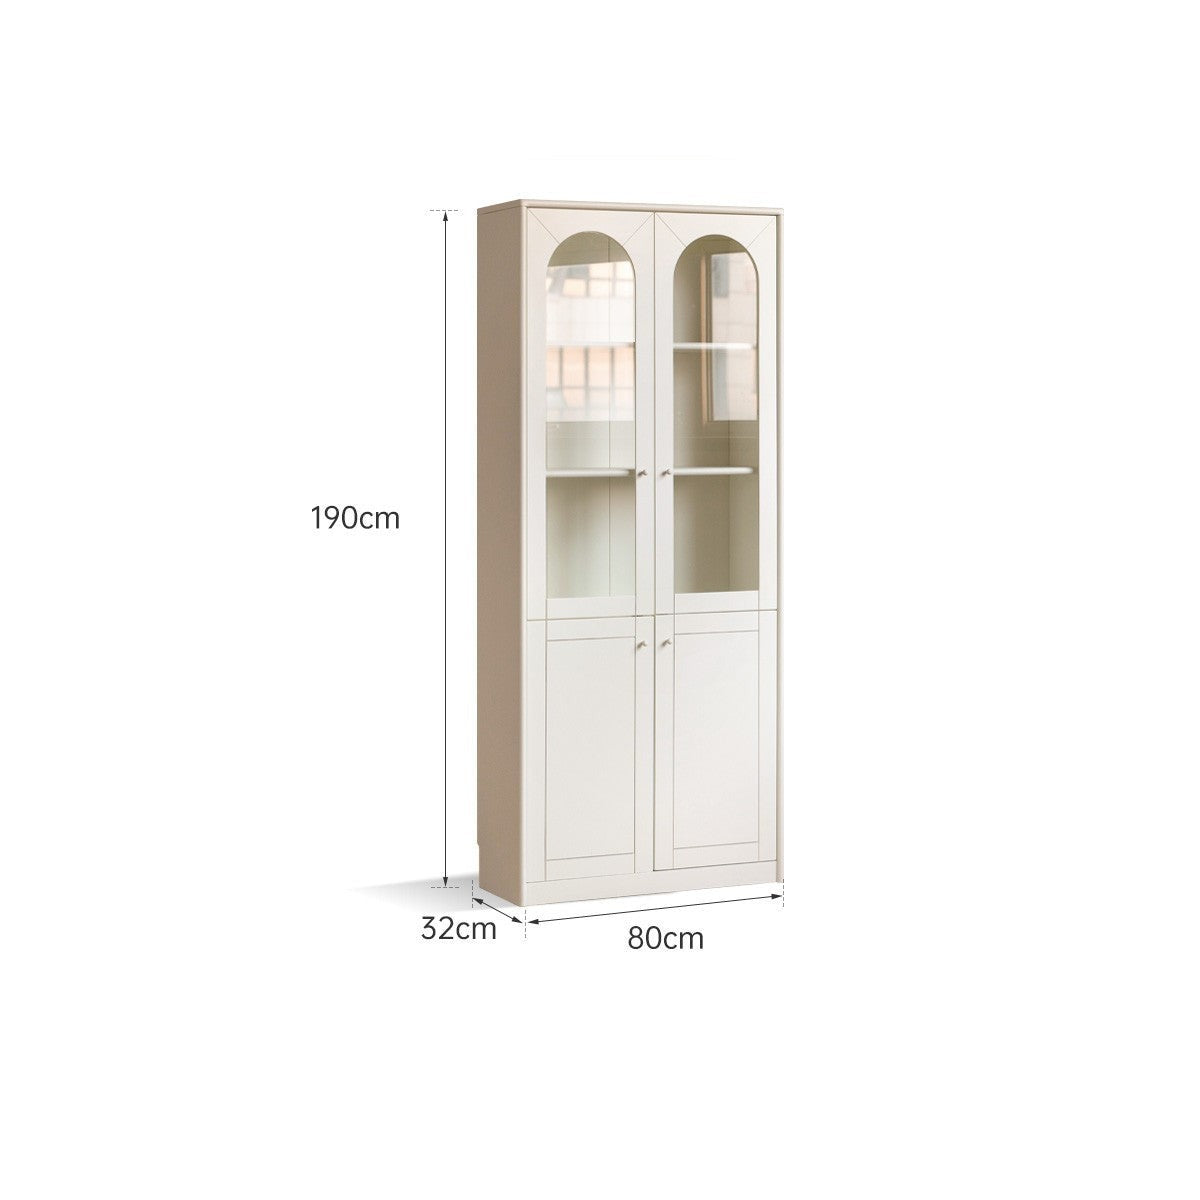 Poplar, birch solid wood bookcase white with glass door whole wall combination French cream style -